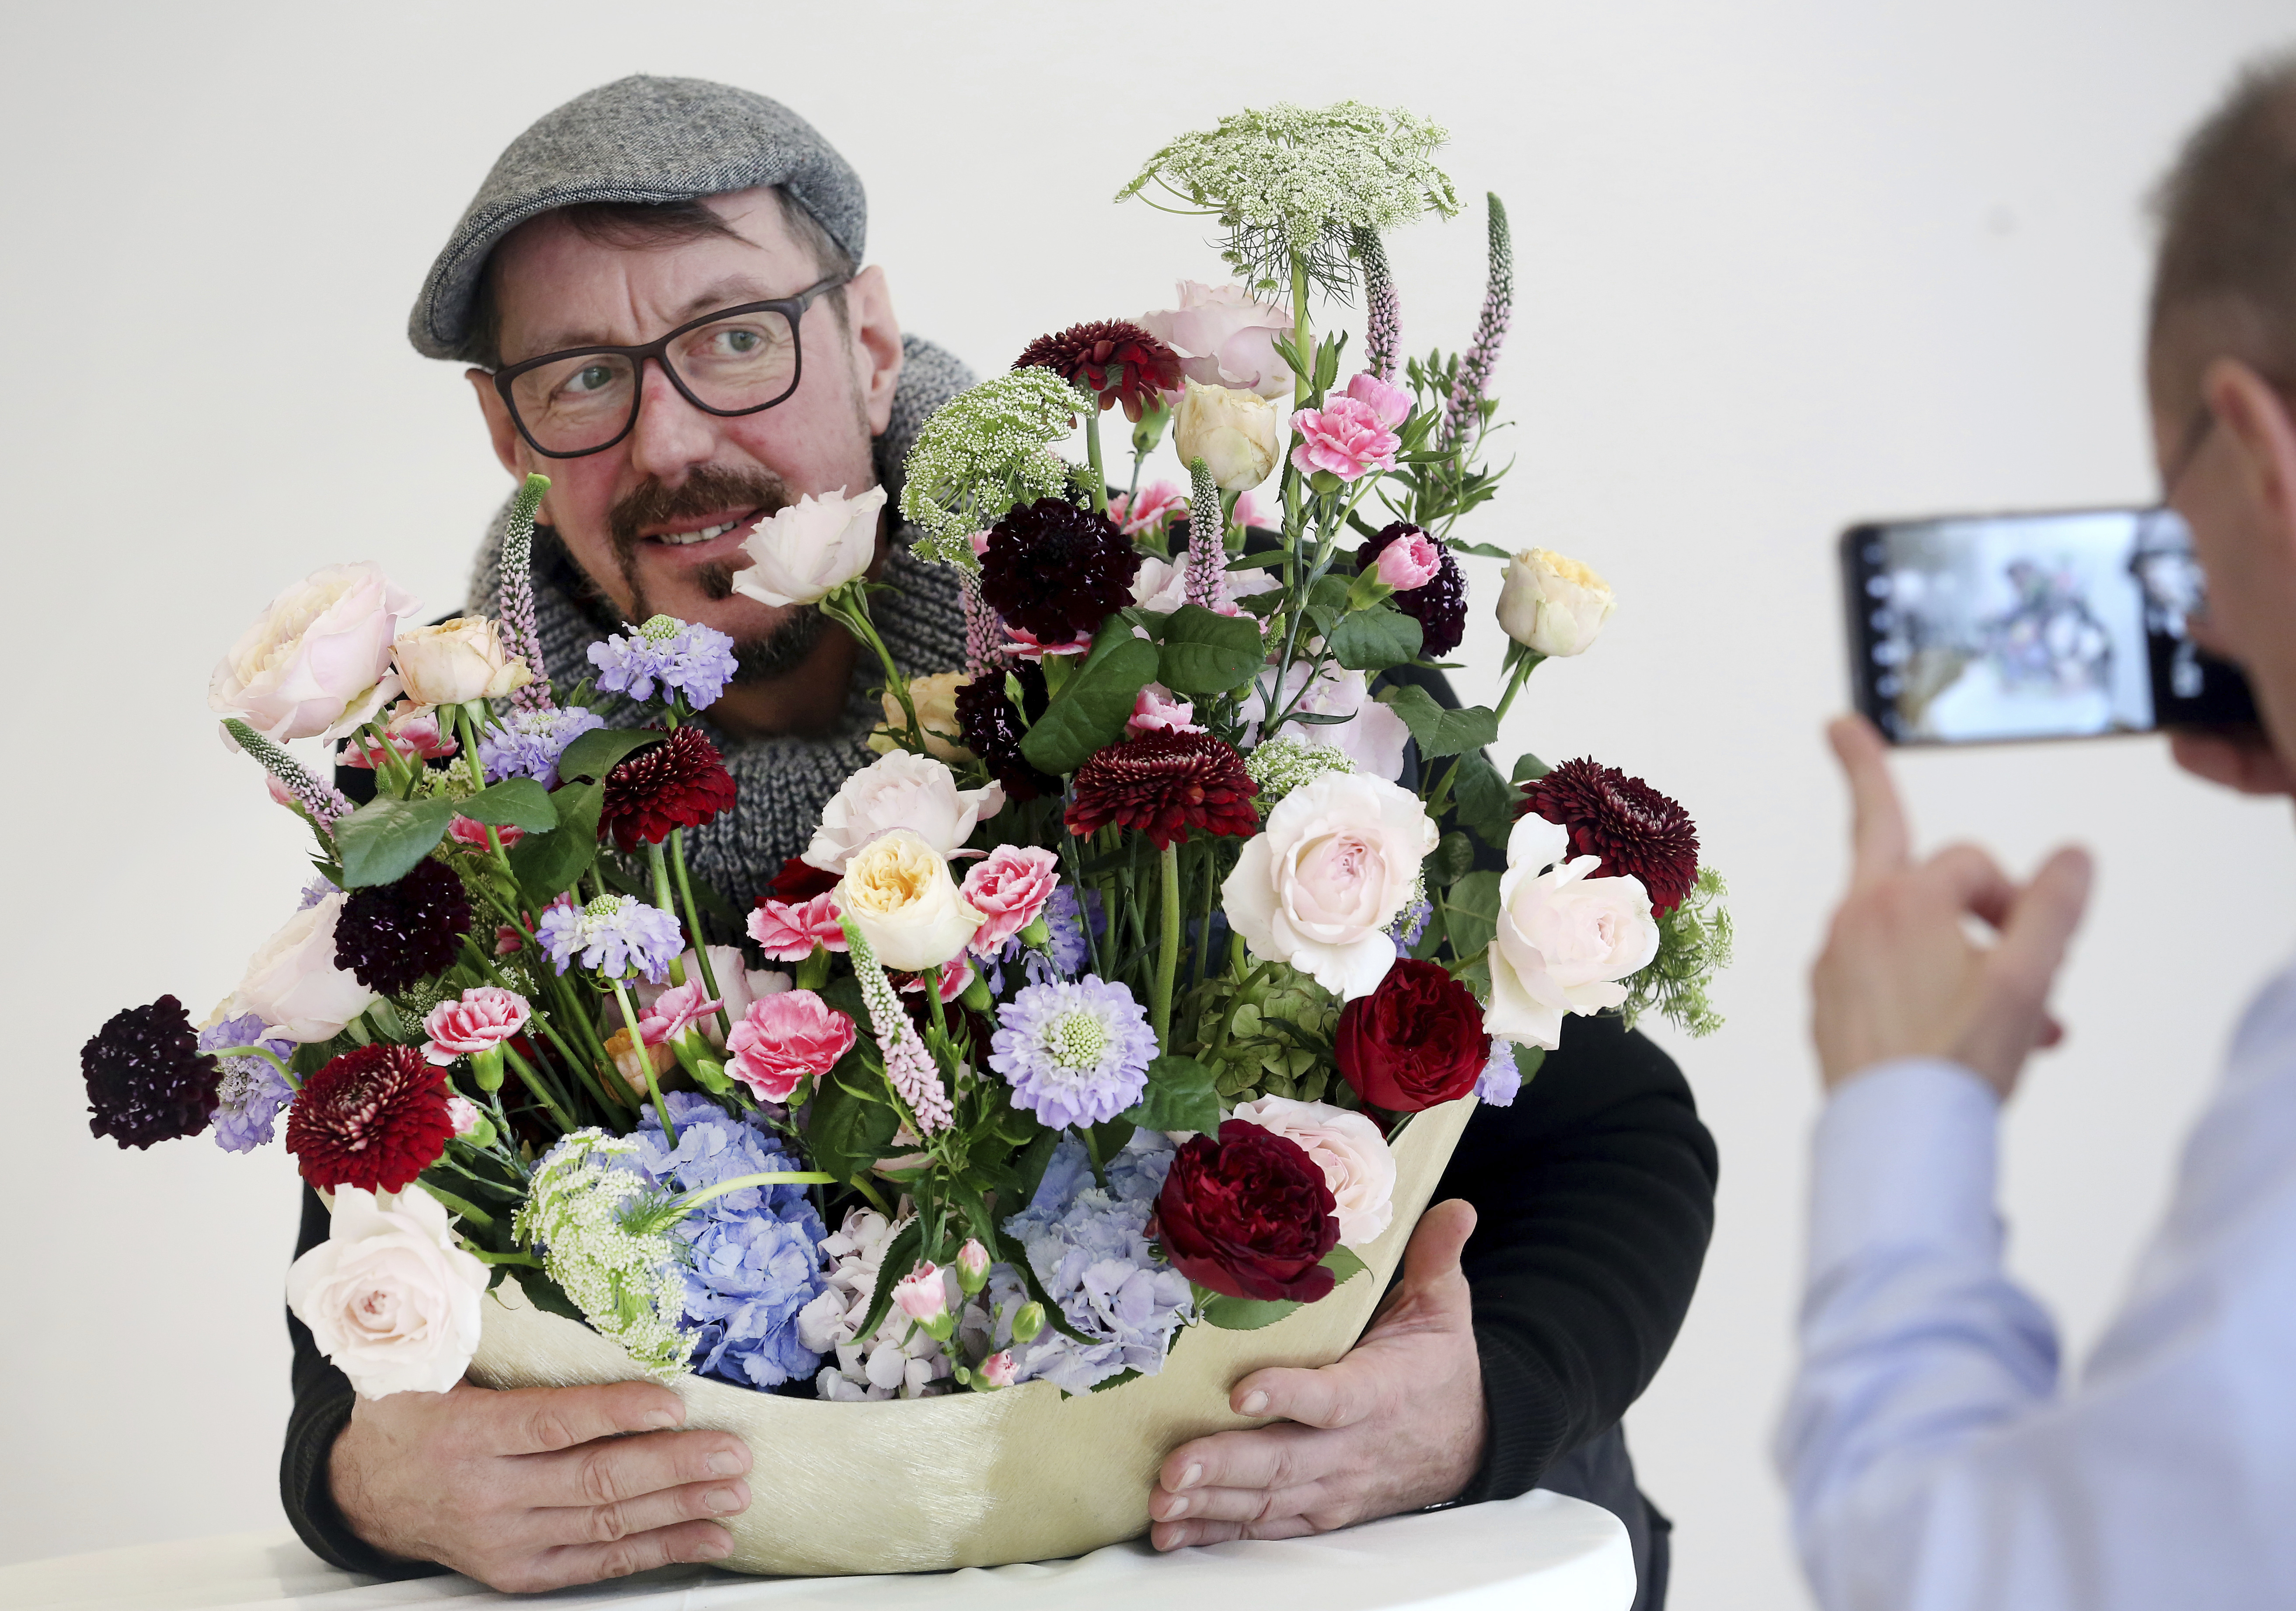 Botanic designer Manfred Hoffmann presents the flower bouquet trend 'Romance 3.0' at the preview of the International Plant Fair (IPM) in Essen, Germany, 22 January 2018. The world-famous gardening fair showcases the innovations of around 1600 enthusiasts and professionals hailing from 50 different countries. Photo by: Roland Weihrauch/picture-alliance/dpa/AP Images